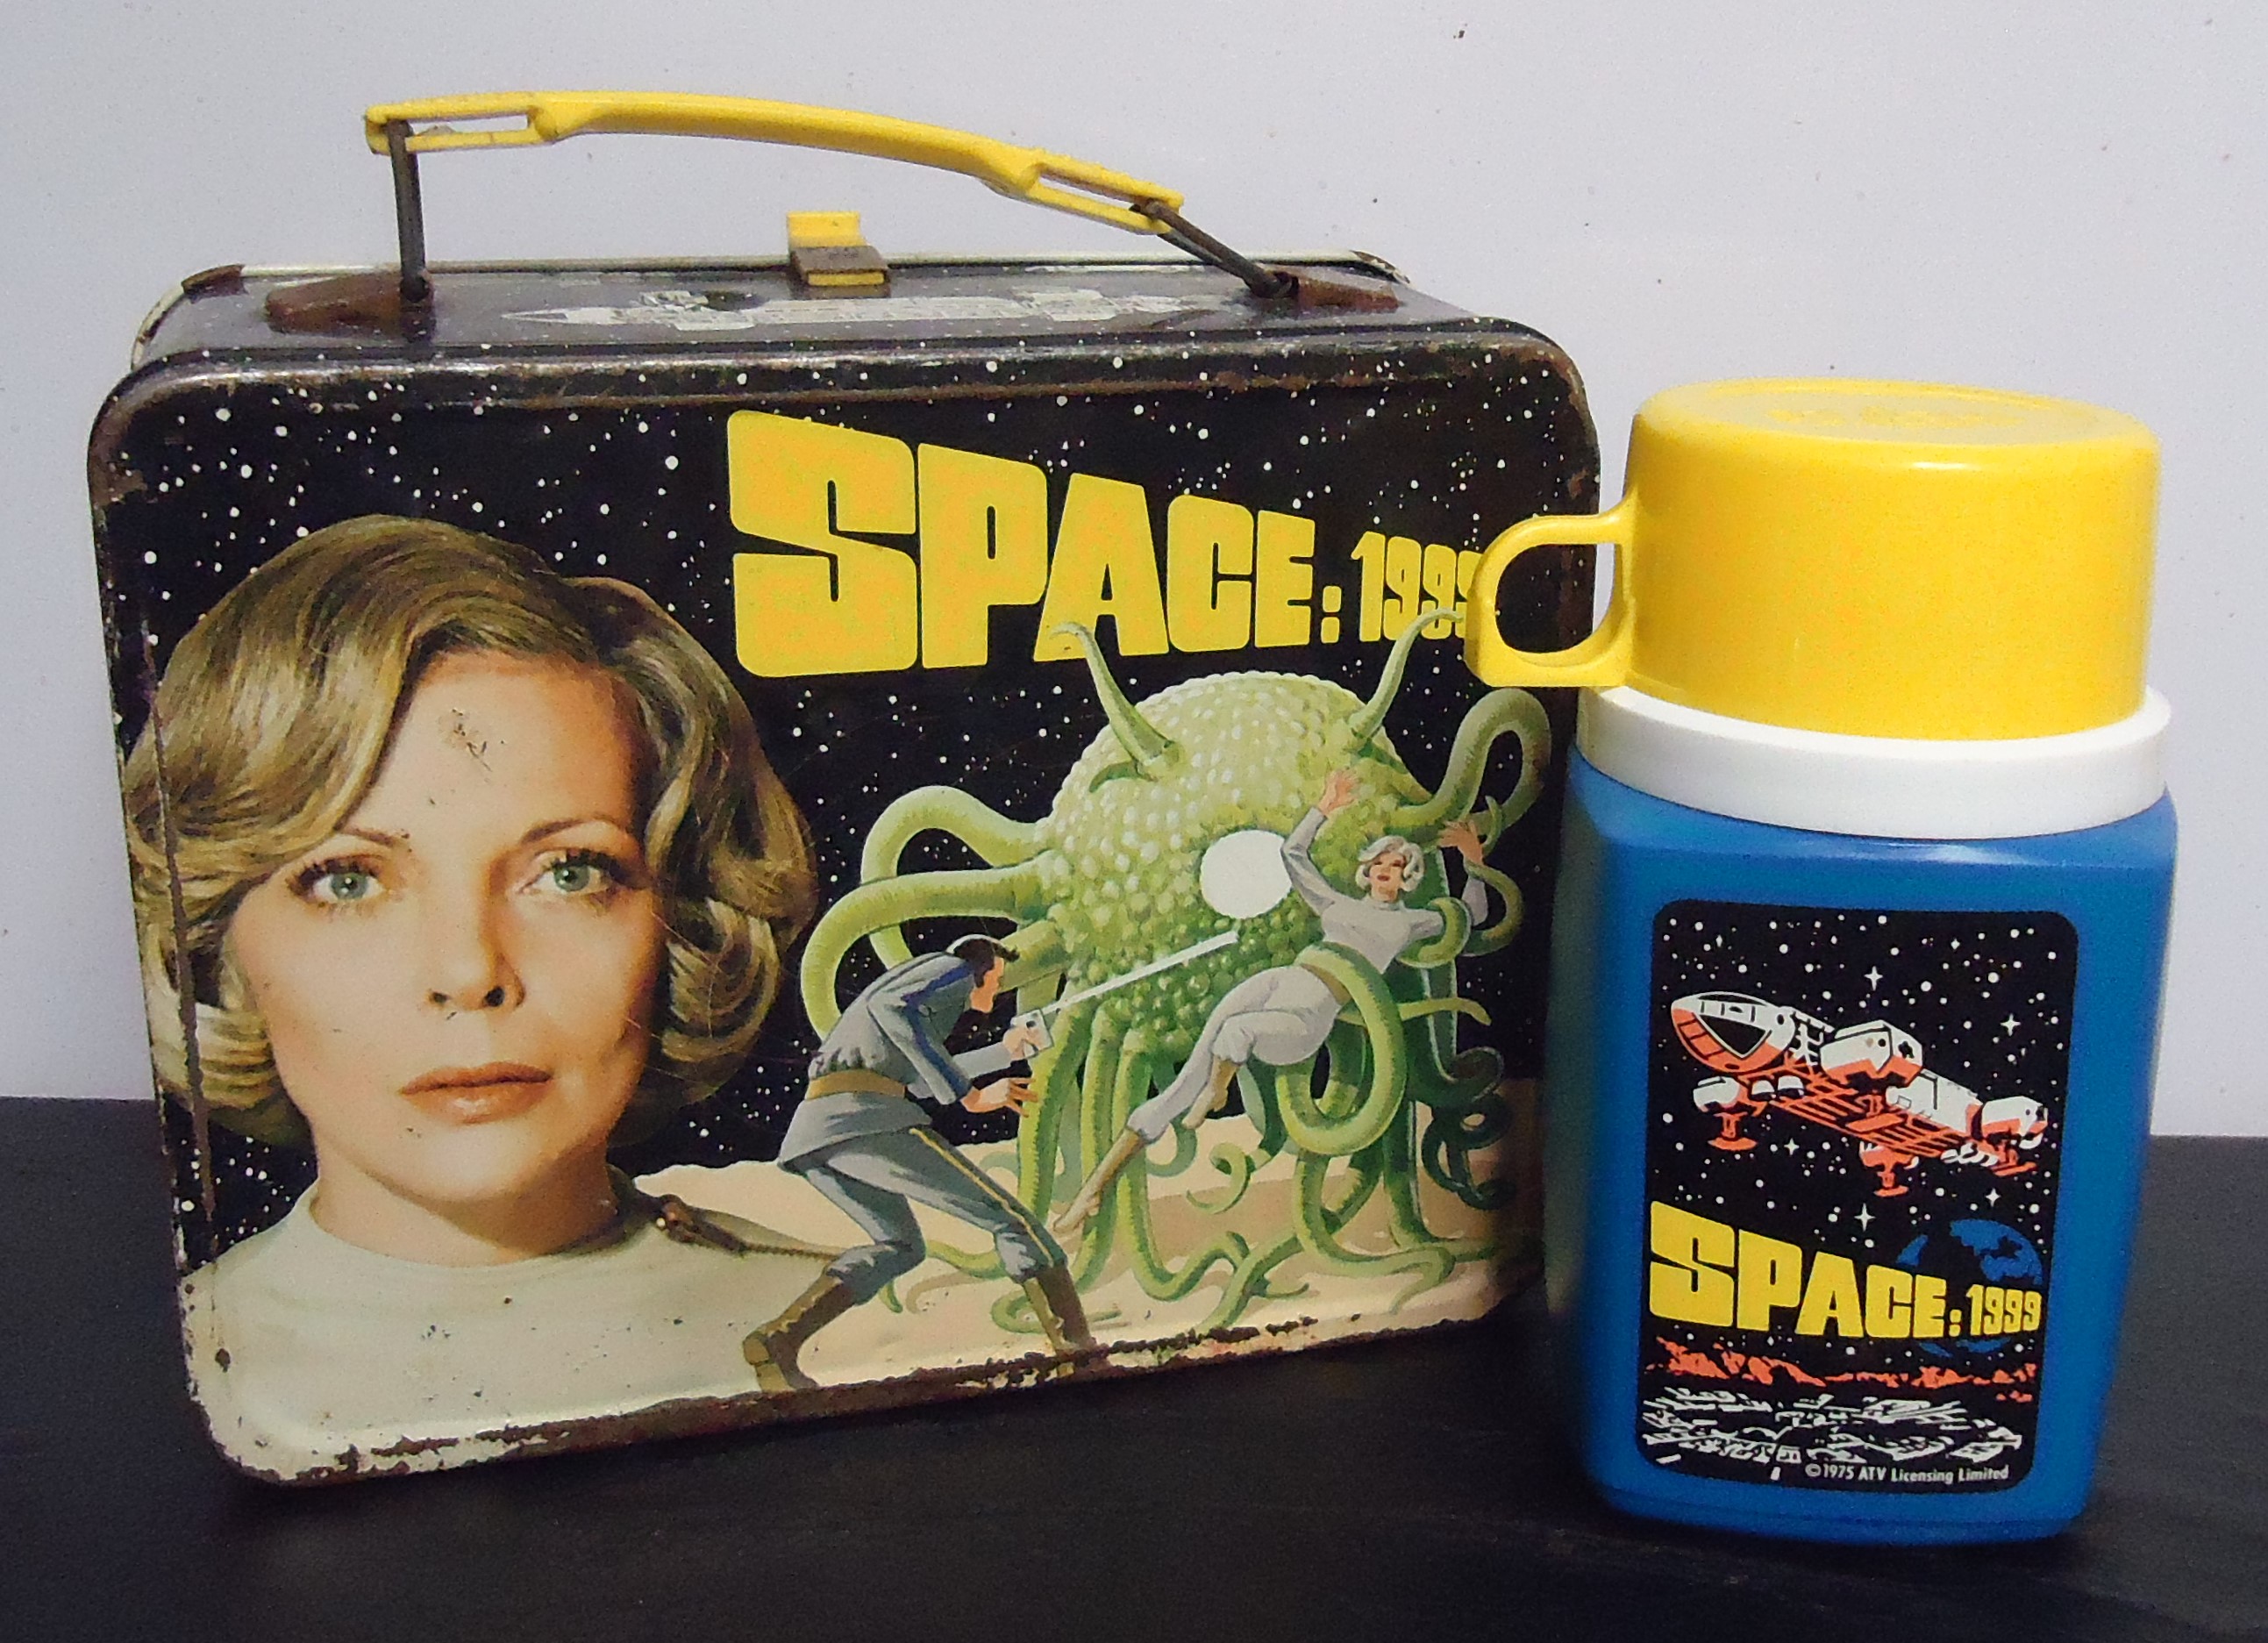 (10) "Space: 1999" Metal Lunch Box 
W/ Thermos
$58.00